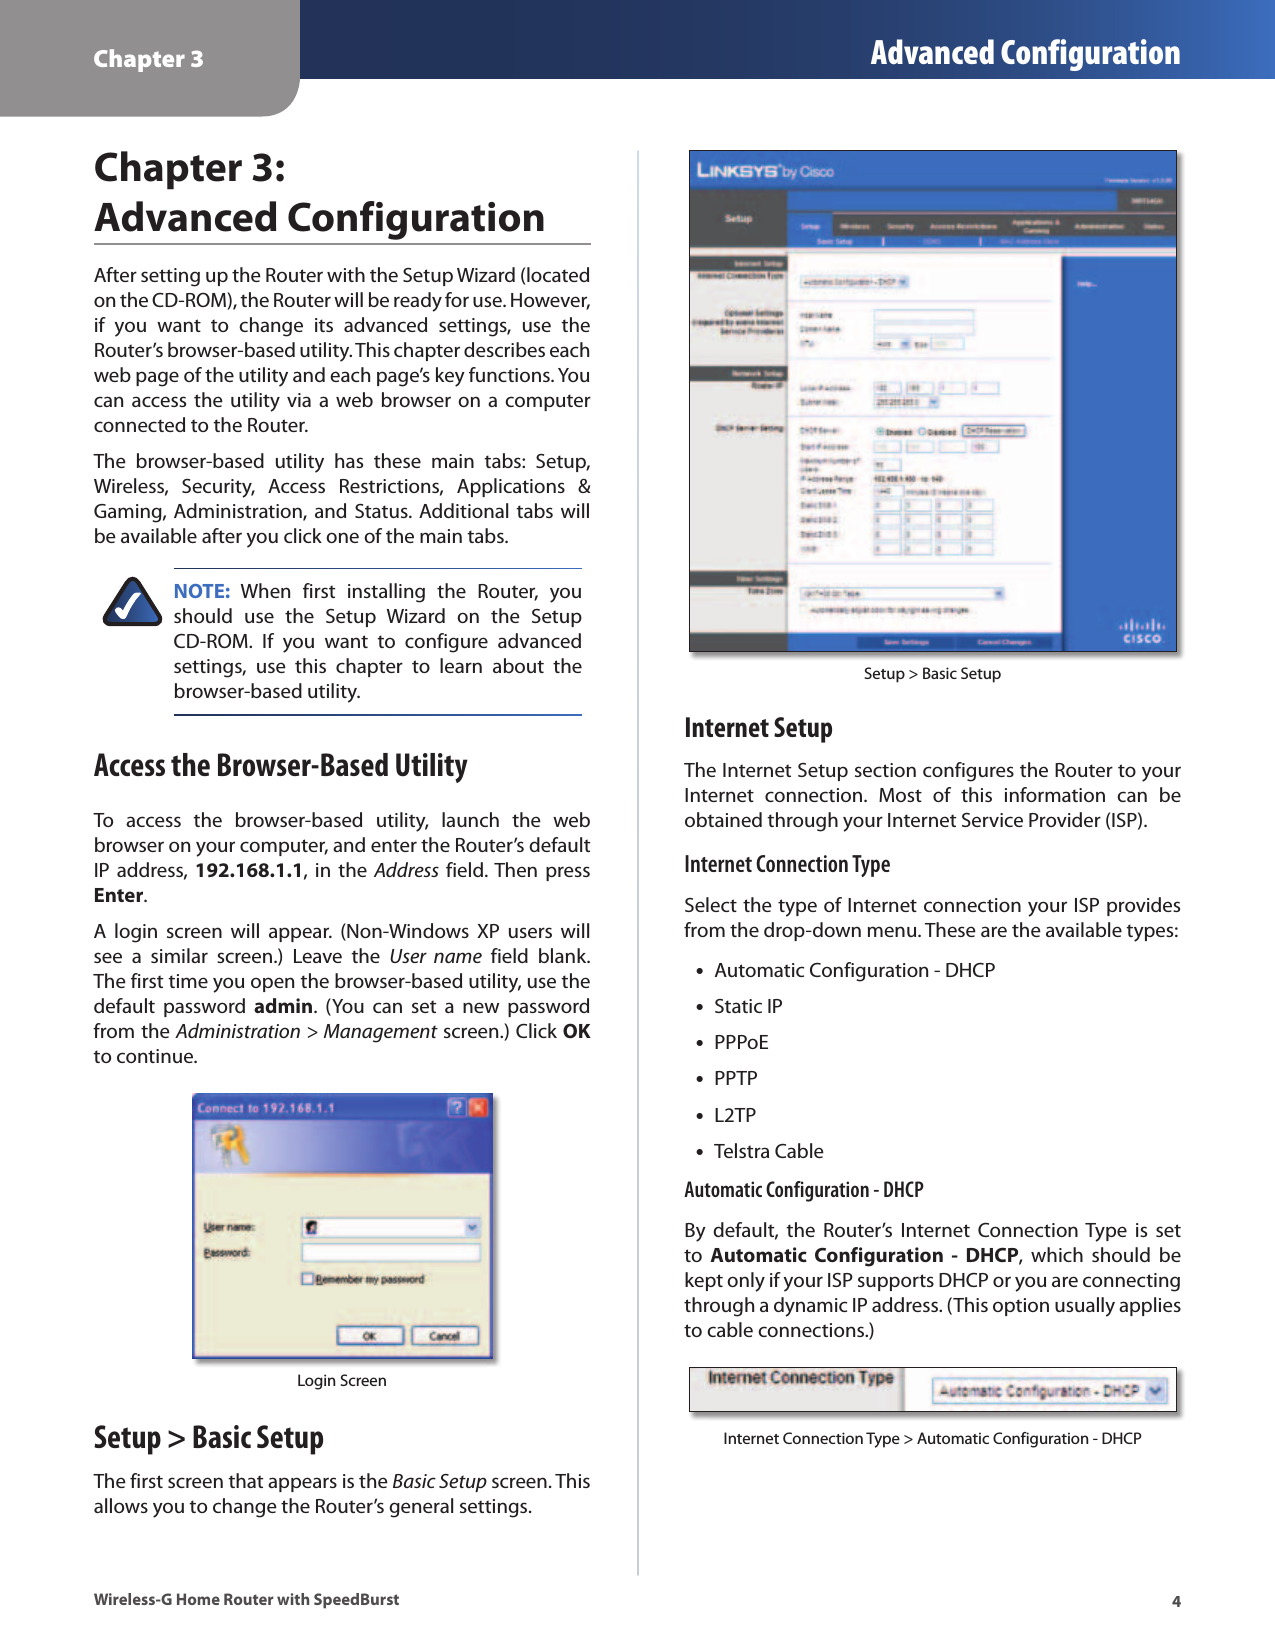 Chapter 3 Advanced Configuration4Wireless-G Home Router with SpeedBurstChapter 3:  Advanced ConfigurationAfter setting up the Router with the Setup Wizard (located on the CD-ROM), the Router will be ready for use. However, if  you  want  to  change  its  advanced  settings,  use  the Router’s browser-based utility. This chapter describes each web page of the utility and each page’s key functions. You can access the  utility via  a  web browser  on a computer connected to the Router.The  browser-based  utility  has  these  main  tabs:  Setup, Wireless,  Security,  Access  Restrictions,  Applications  &amp; Gaming, Administration, and Status. Additional tabs will be available after you click one of the main tabs.NOTE:  When  first  installing  the  Router,  you should  use  the  Setup  Wizard  on  the  Setup CD-ROM.  If  you  want  to  configure  advanced settings,  use  this  chapter  to  learn  about  the browser-based utility.Access the Browser-Based UtilityTo  access  the  browser-based  utility,  launch  the  web browser on your computer, and enter the Router’s default IP address, 192.168.1.1, in  the Address  field. Then press Enter.A  login  screen  will  appear.  (Non-Windows  XP  users  will see  a  similar  screen.)  Leave  the  User  name  field  blank. The first time you open the browser-based utility, use the default  password  admin.  (You  can  set  a  new  password from the Administration &gt; Management screen.) Click OK to continue.Login ScreenSetup &gt; Basic SetupThe first screen that appears is the Basic Setup screen. This allows you to change the Router’s general settings. Setup &gt; Basic SetupInternet SetupThe Internet Setup section configures the Router to your Internet  connection.  Most  of  this  information  can  be obtained through your Internet Service Provider (ISP).Internet Connection TypeSelect the type of Internet connection your ISP provides from the drop-down menu. These are the available types: •Automatic Configuration - DHCP •Static IP •PPPoE •PPTP •L2TP •Telstra CableAutomatic Configuration - DHCPBy  default,  the  Router’s  Internet  Connection Type  is  set to  Automatic  Configuration  -  DHCP,  which  should  be kept only if your ISP supports DHCP or you are connecting through a dynamic IP address. (This option usually applies to cable connections.)Internet Connection Type &gt; Automatic Configuration - DHCP